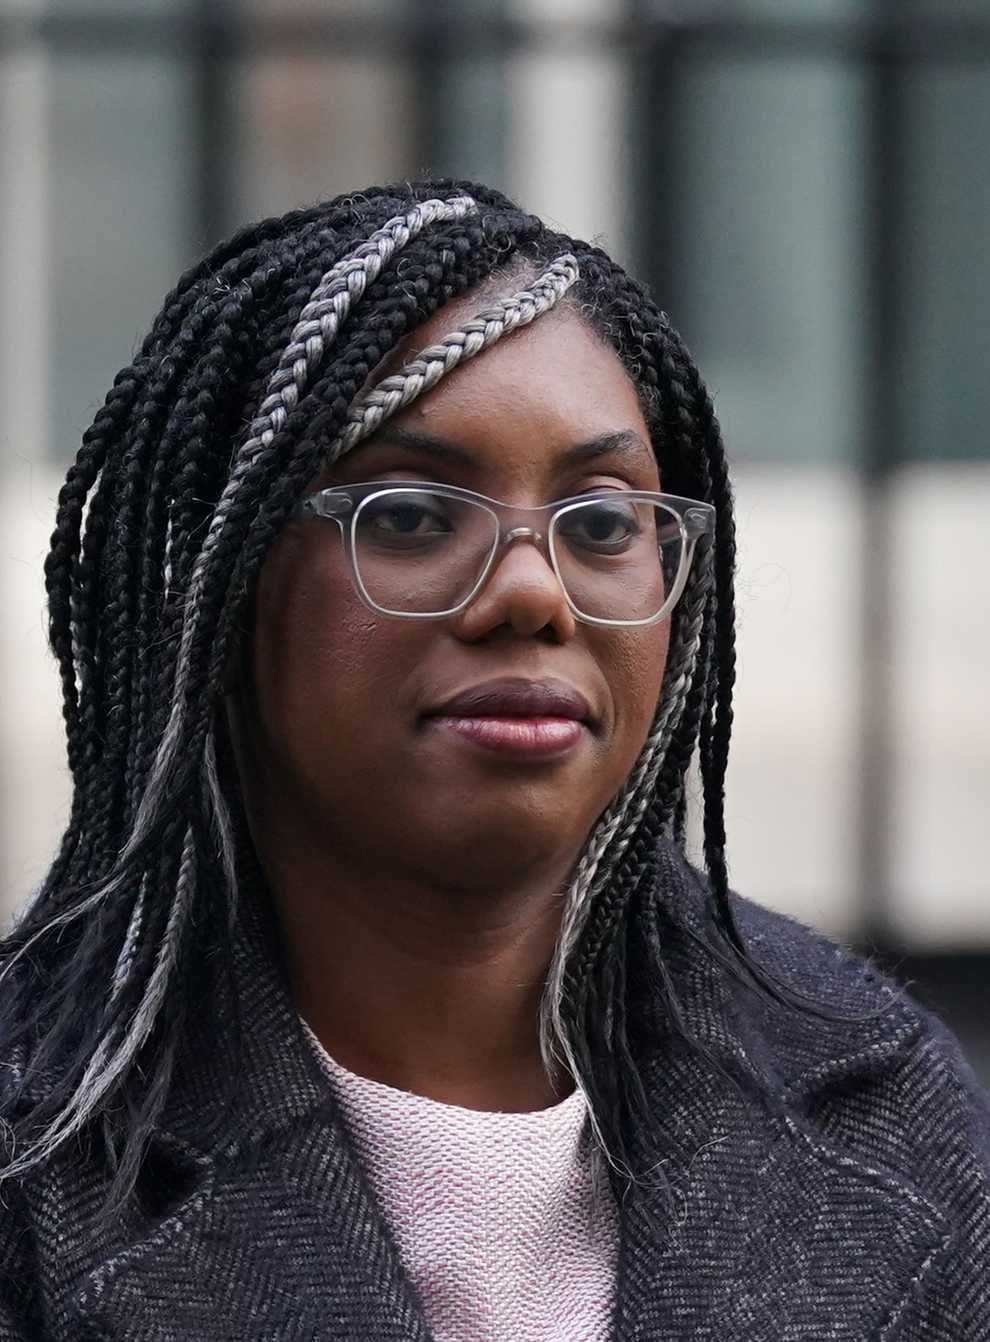 Kemi Badenoch faced criticism for rejecting recommendations on menopause leave (Kirsty O’Connor/PA)